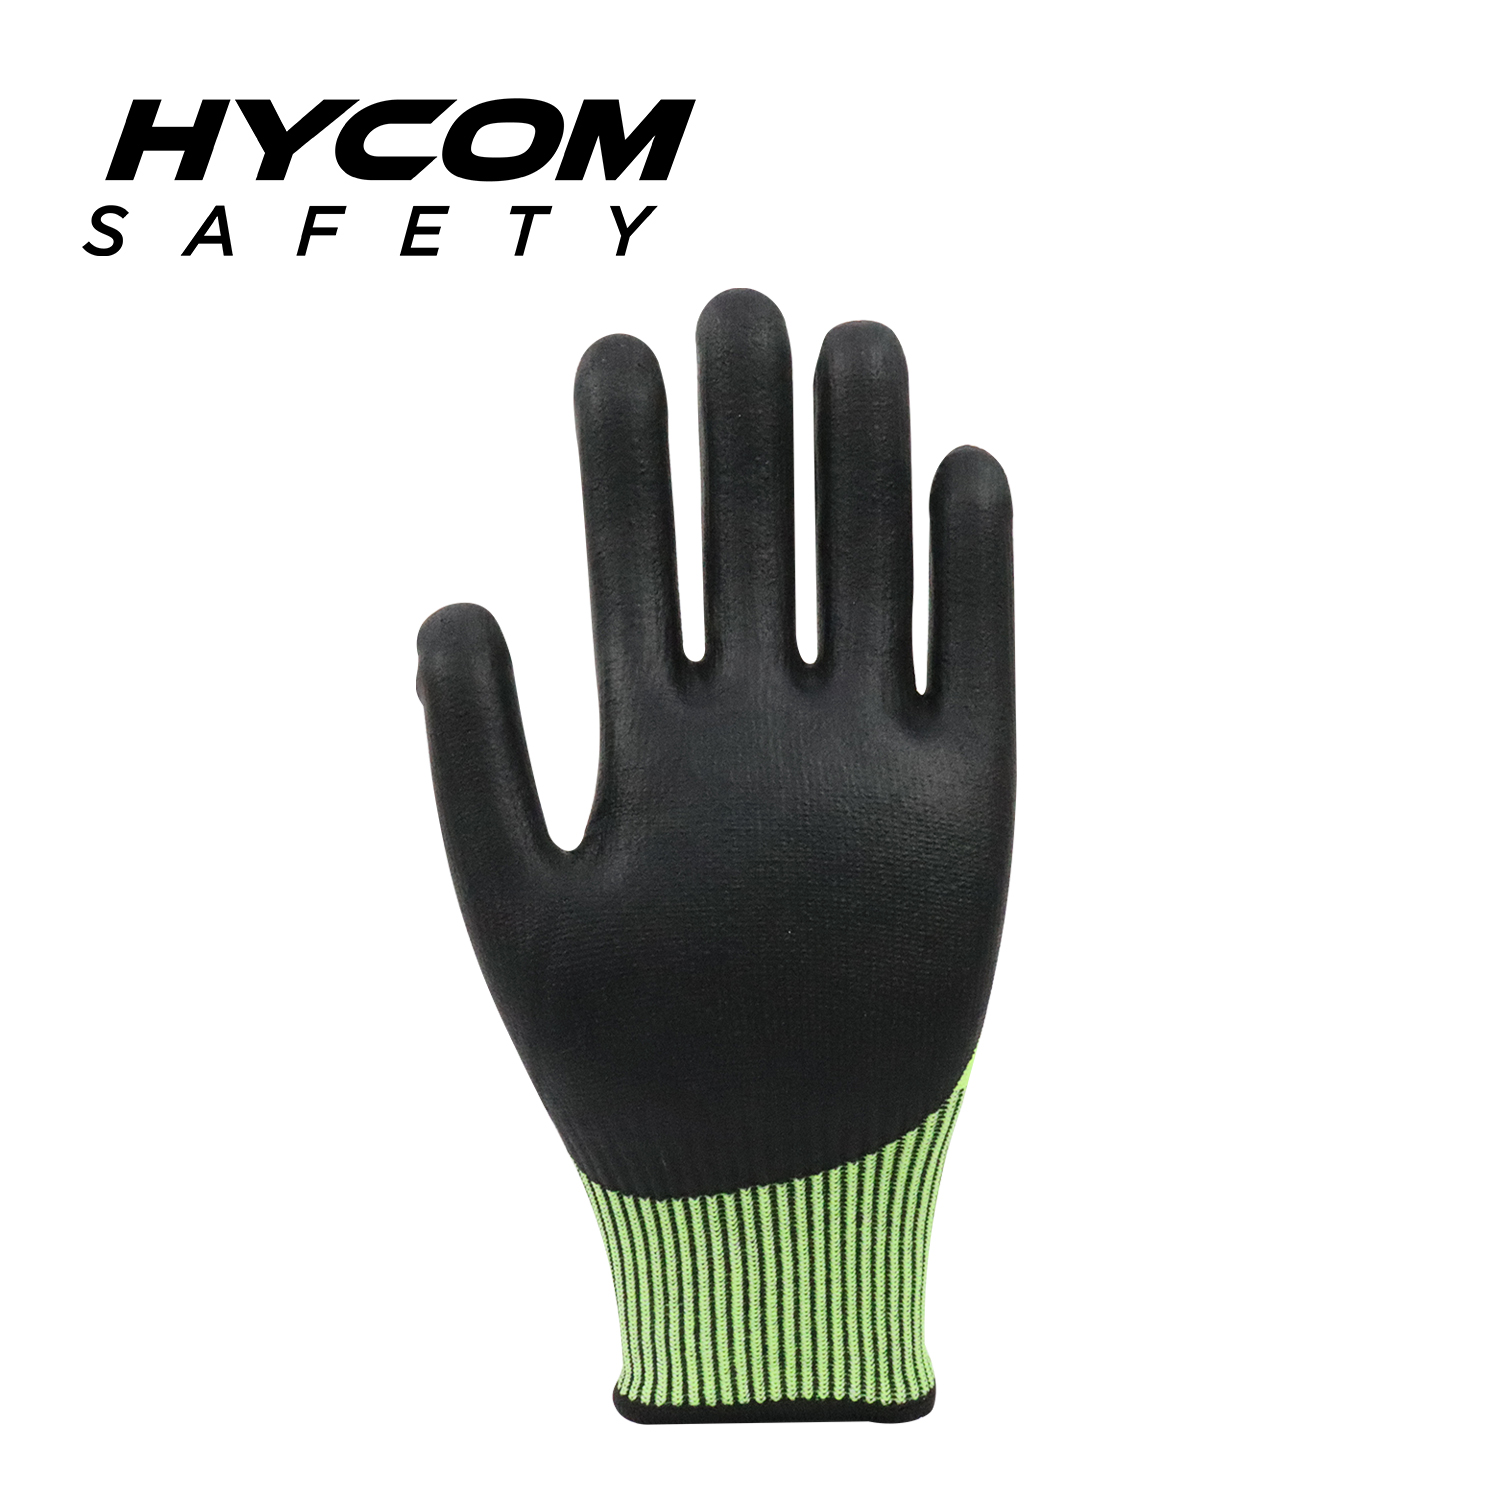 HYCOM 13GG ANSI 5 Cut Resistant Glove with 3/4 Nitrile Coating PPE Work Gloves